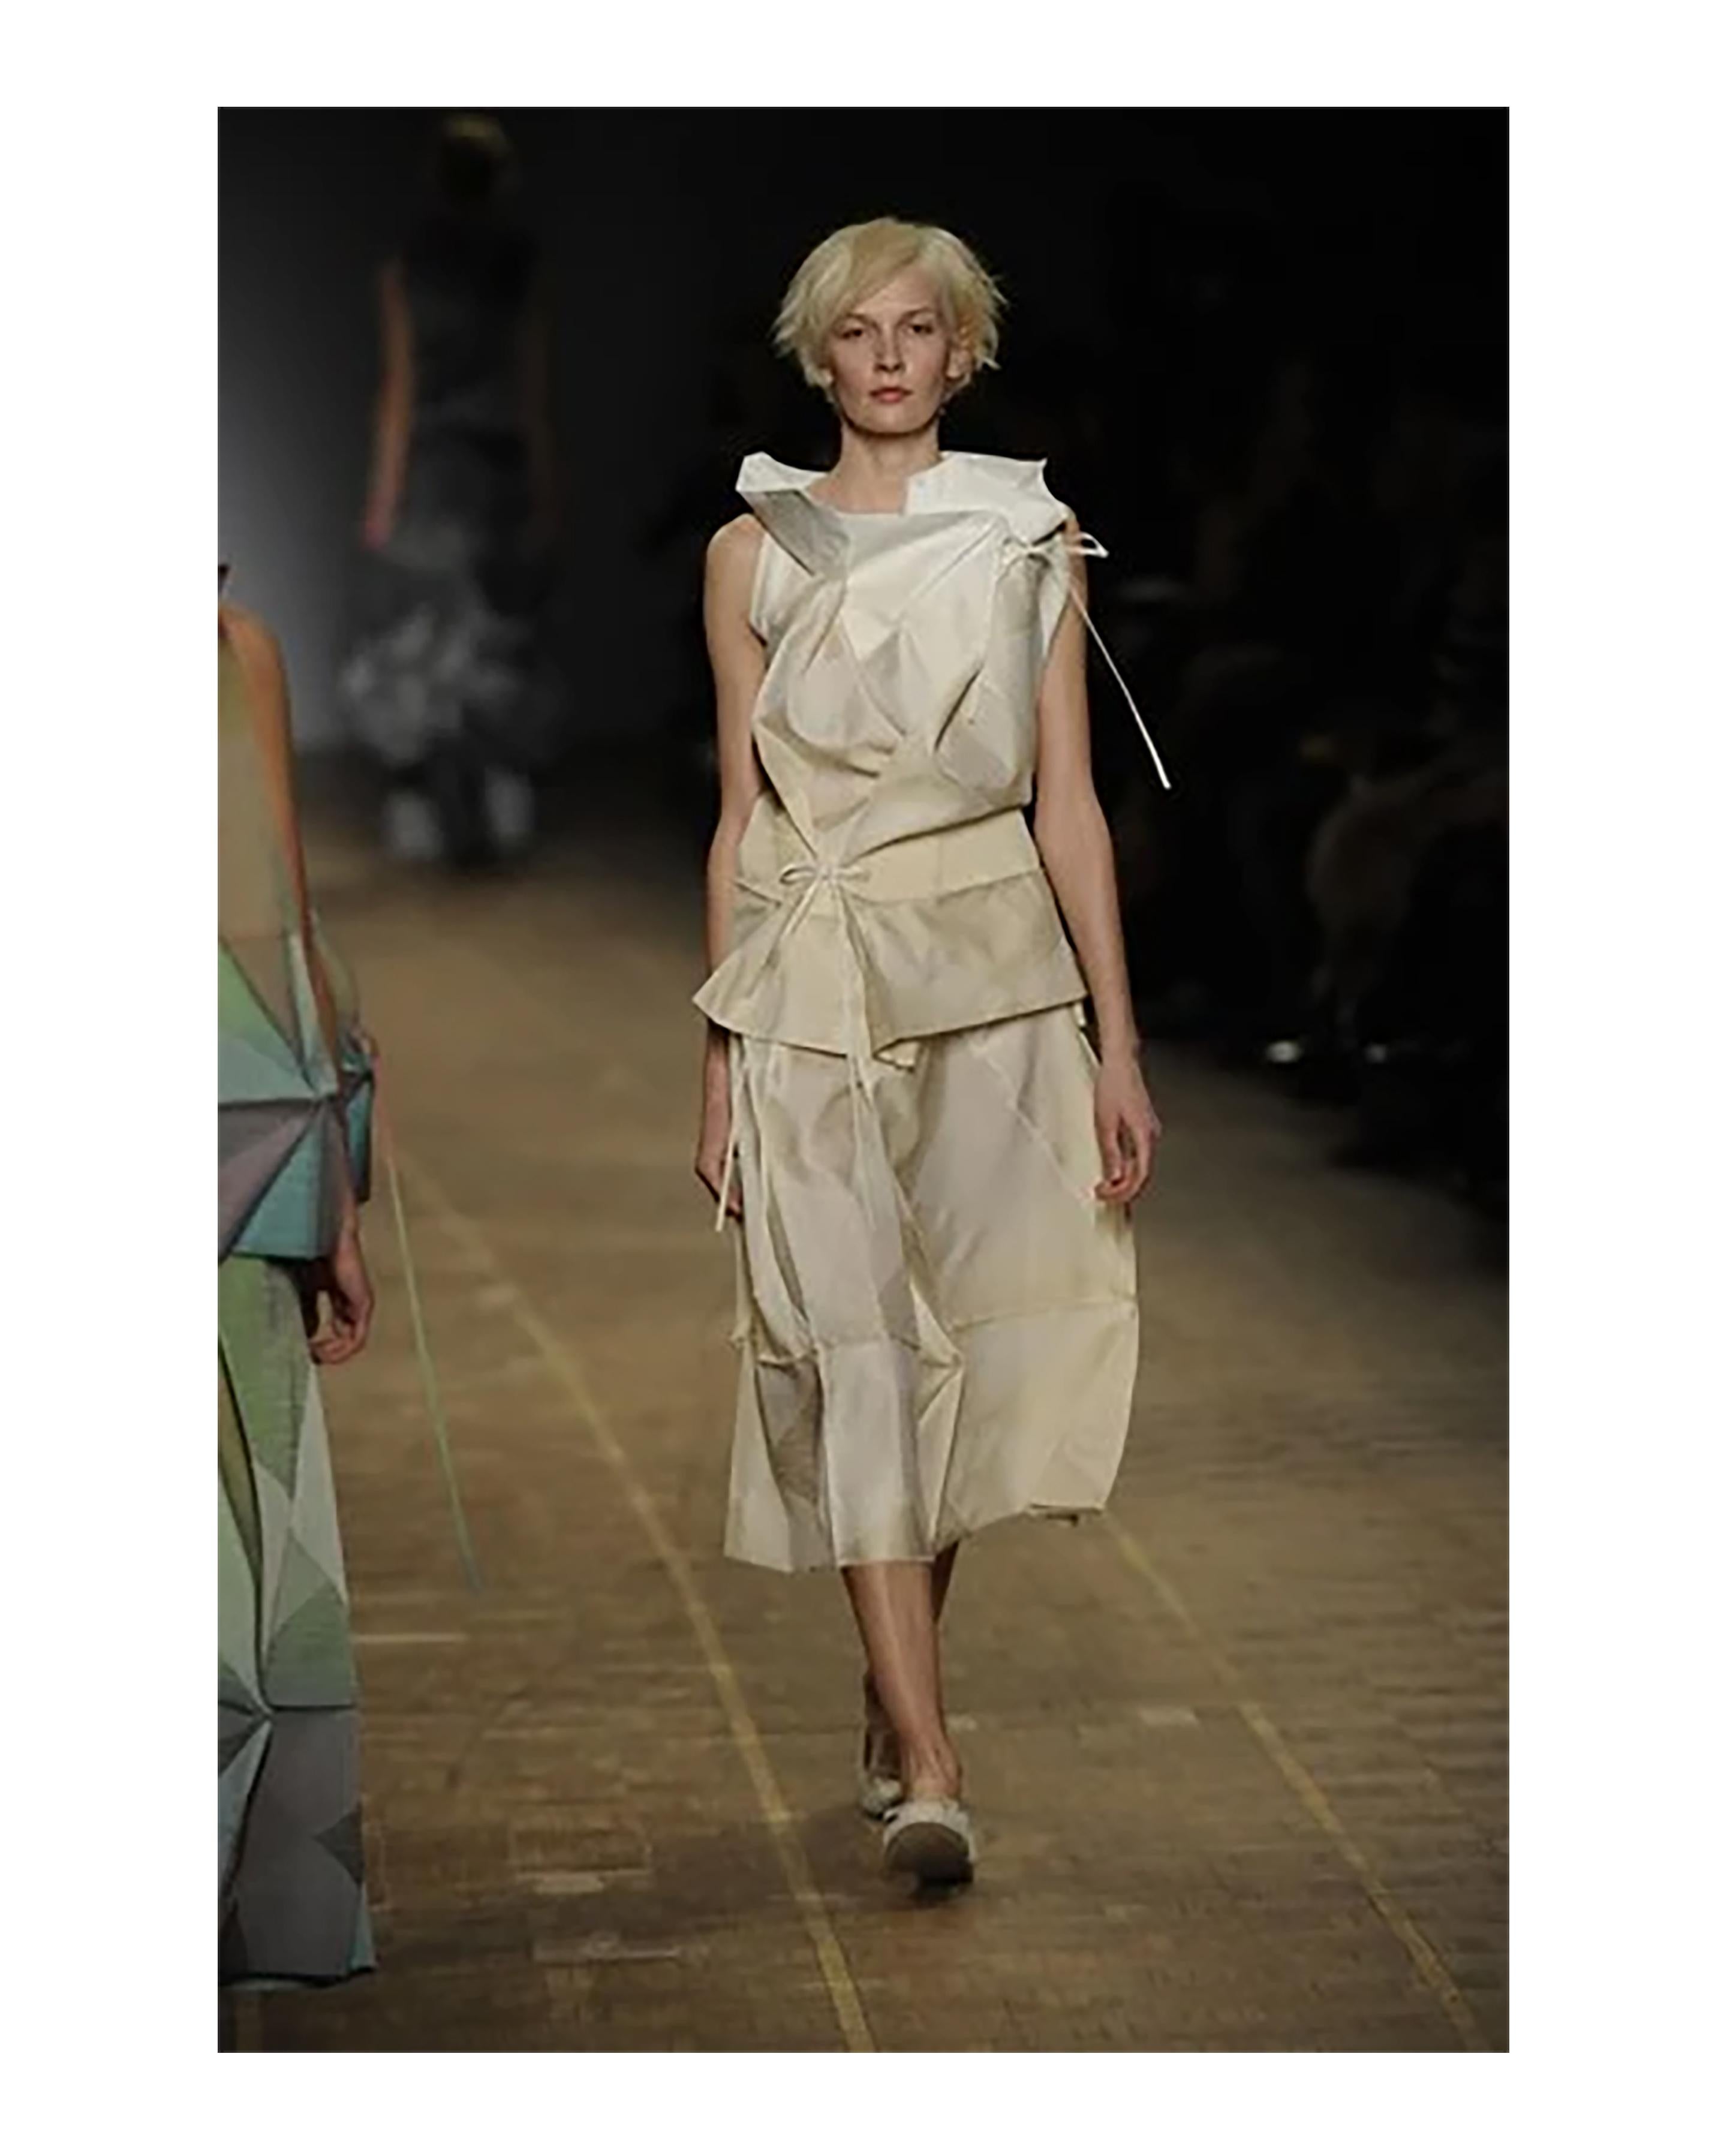 A/W 2008 Issey Miyake white and cream geometric sleeveless gown. Layered cowl neck dress with adjustable ties at chest and waist allowing for a variety of styling and sizing opportunities. Features triangular geometric paneling throughout,